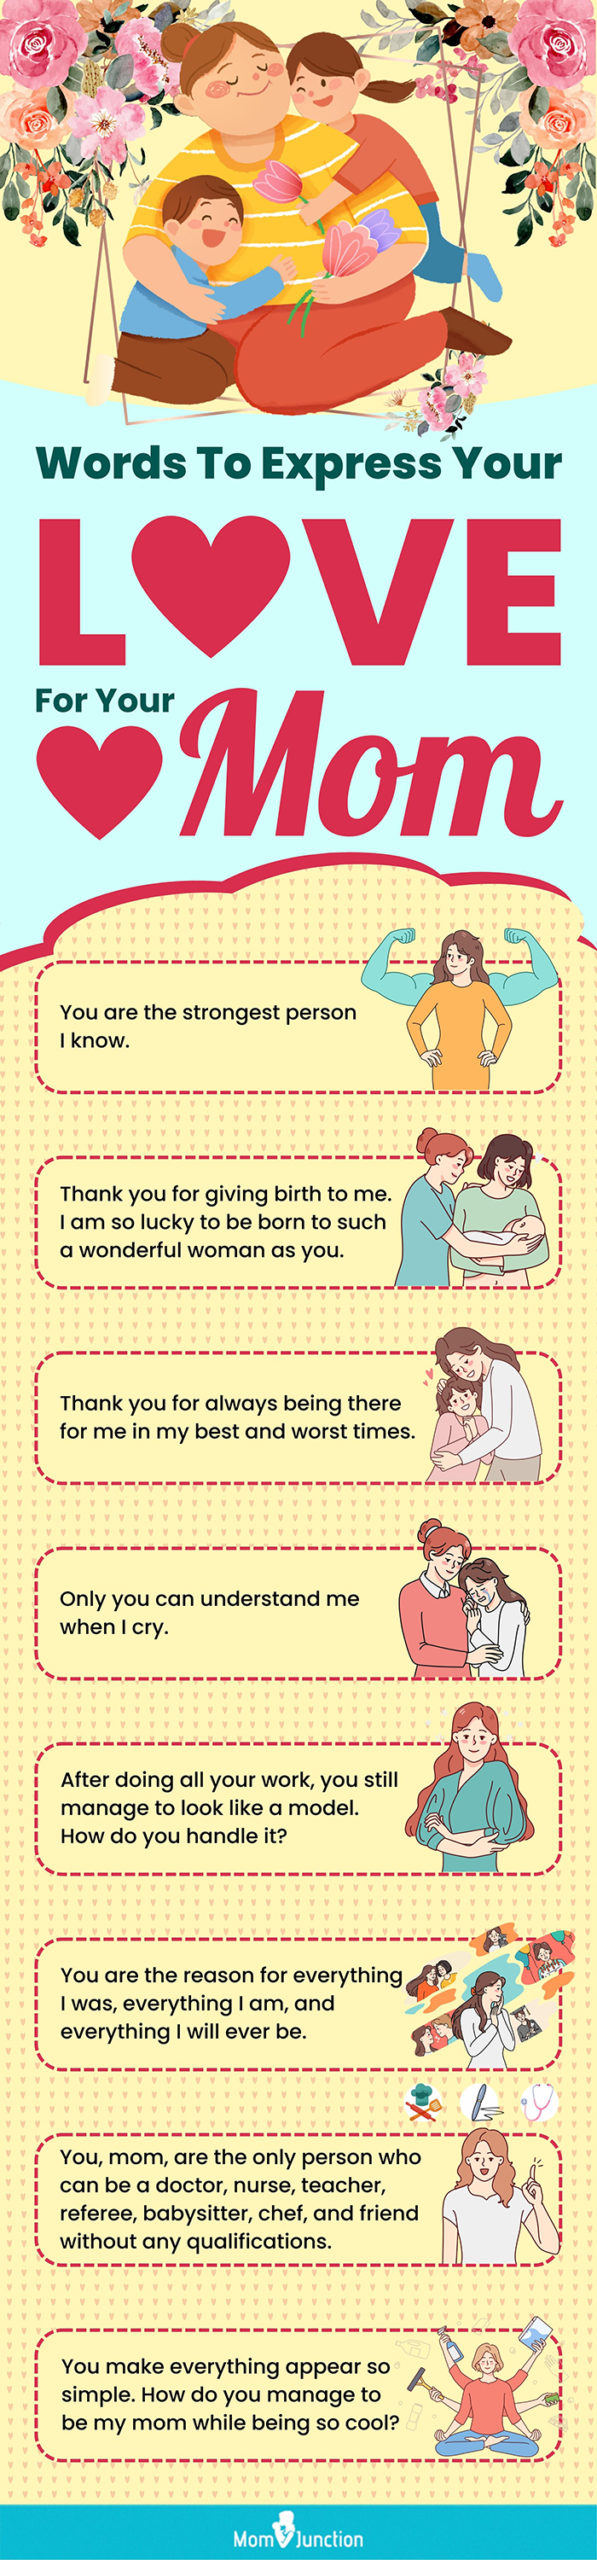 Gift Ideas for Daughter 5 Things You Should Know About My Mom, She Is A  Crazy Mom - Sweet Family Gift